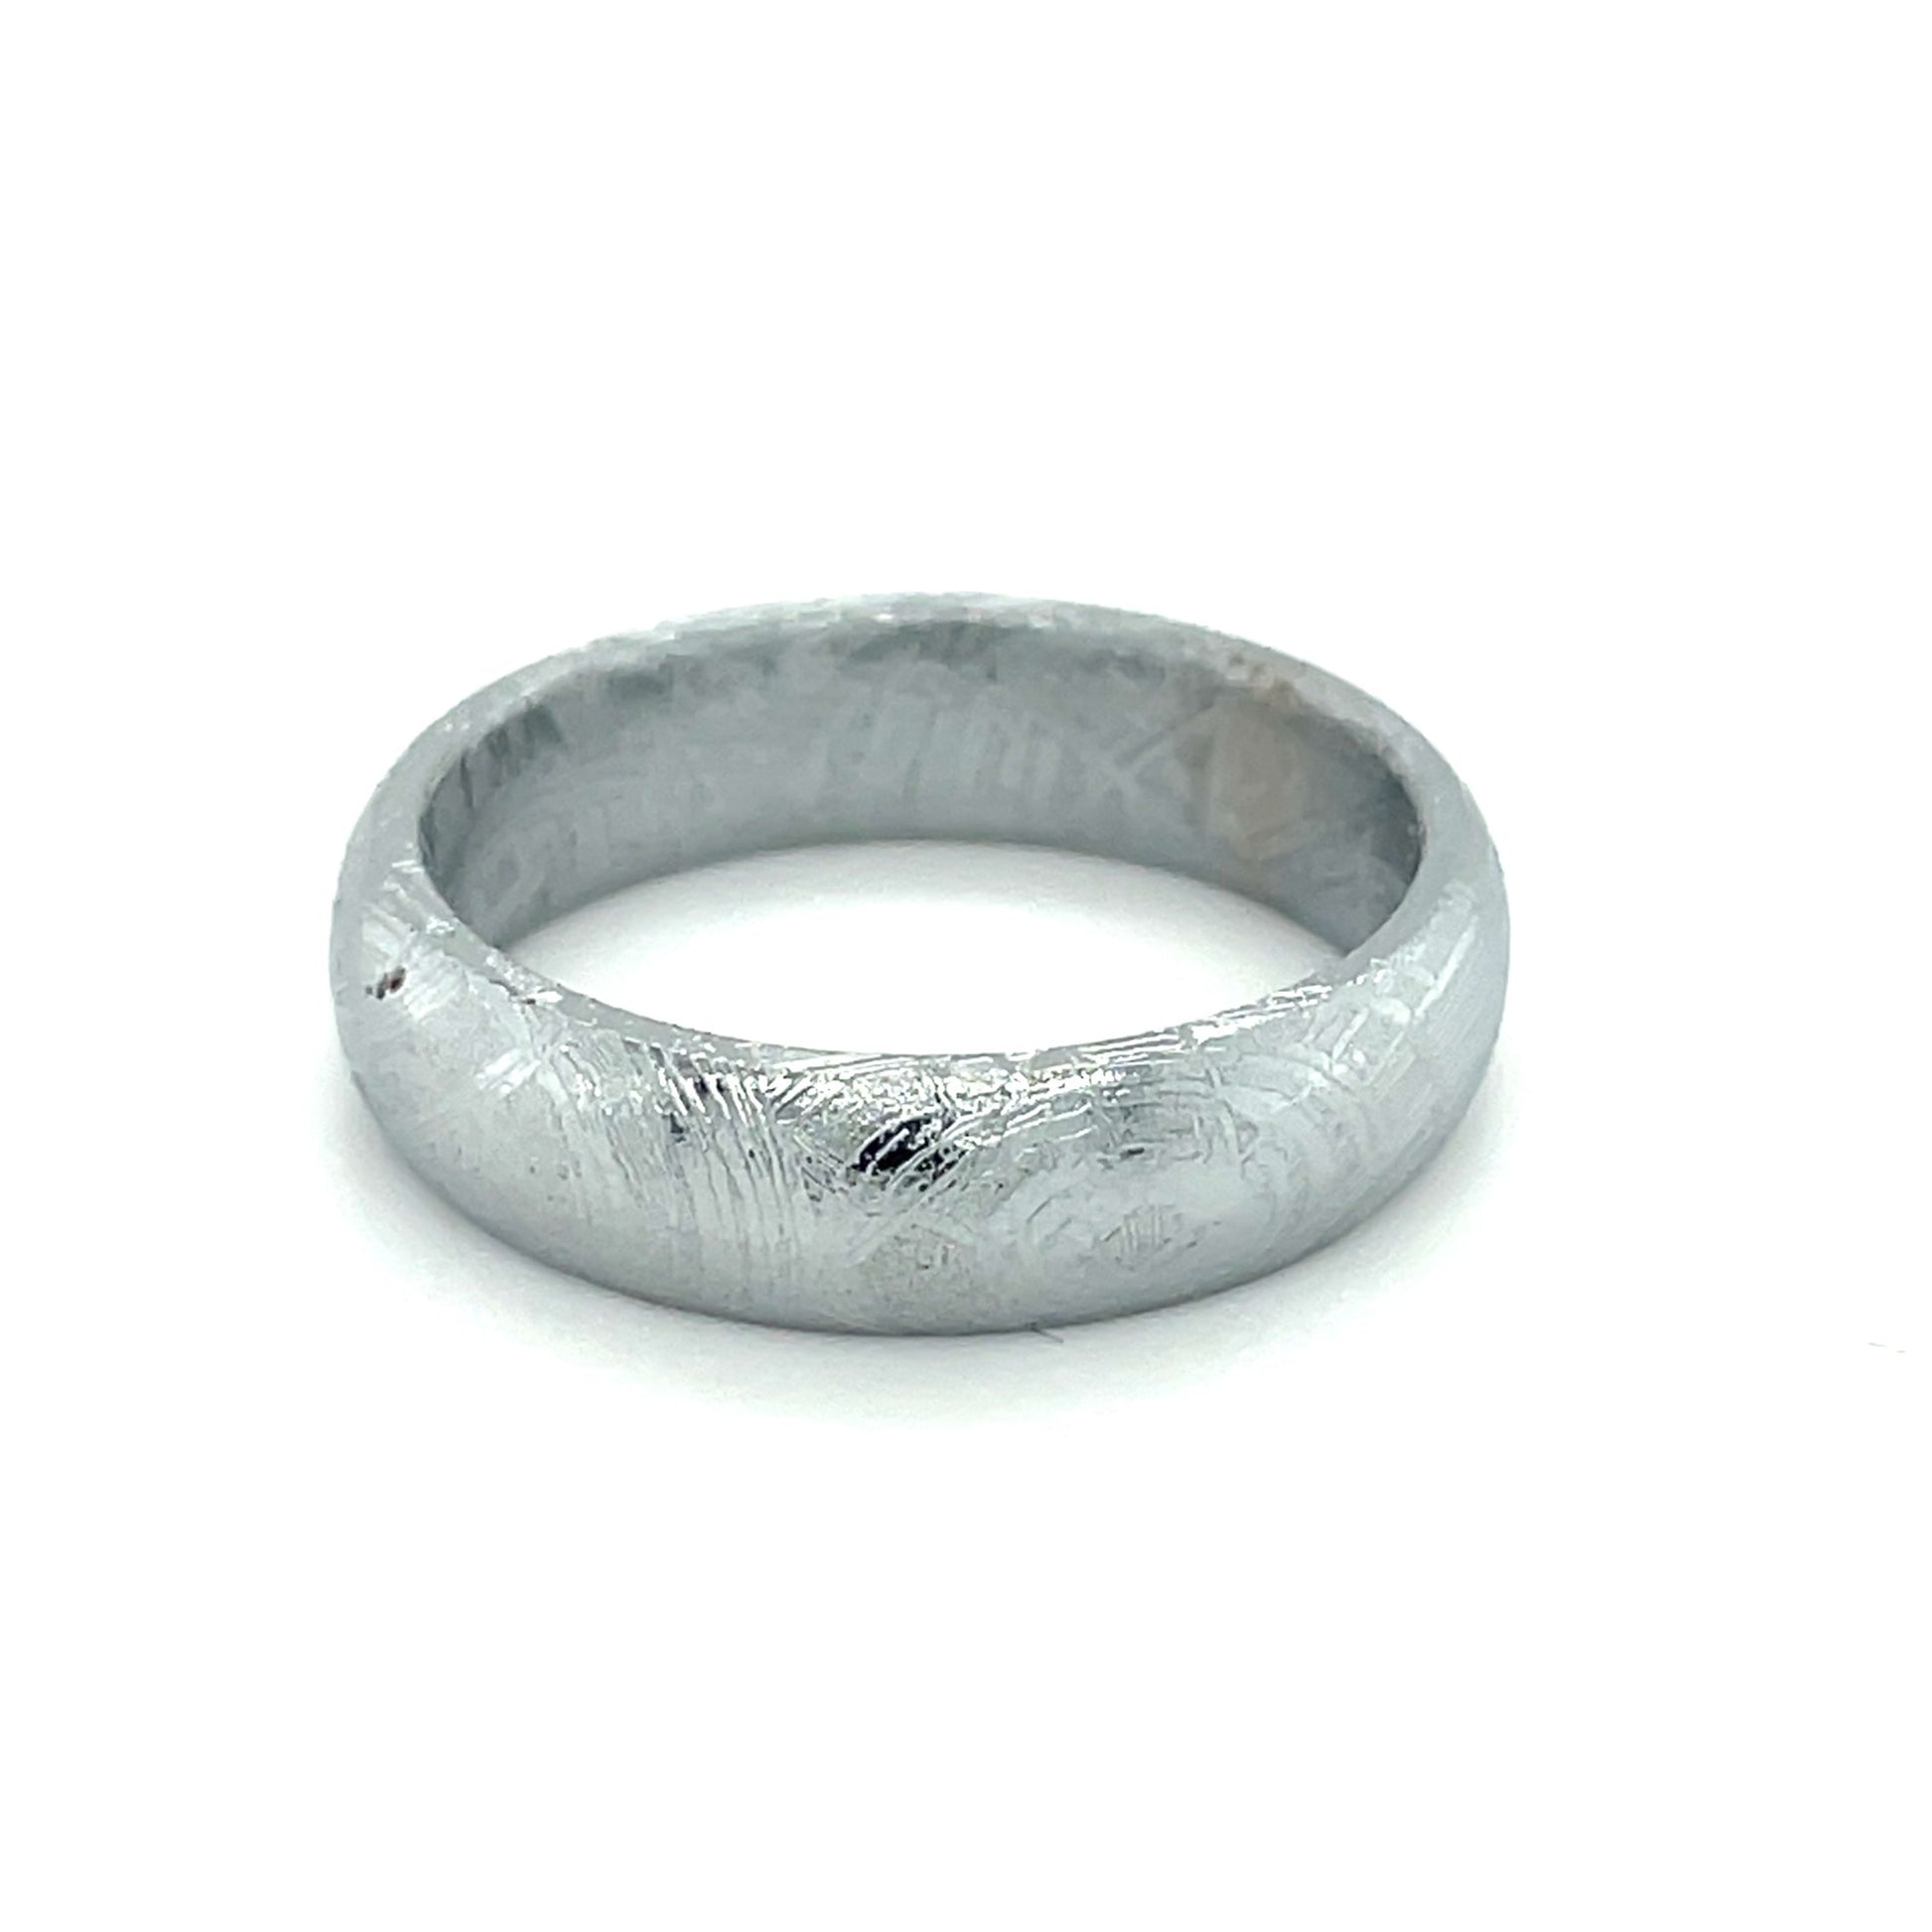 meteorite band made on cape cod by michaels custom jewelers, 14k white gold band, unique wedding band